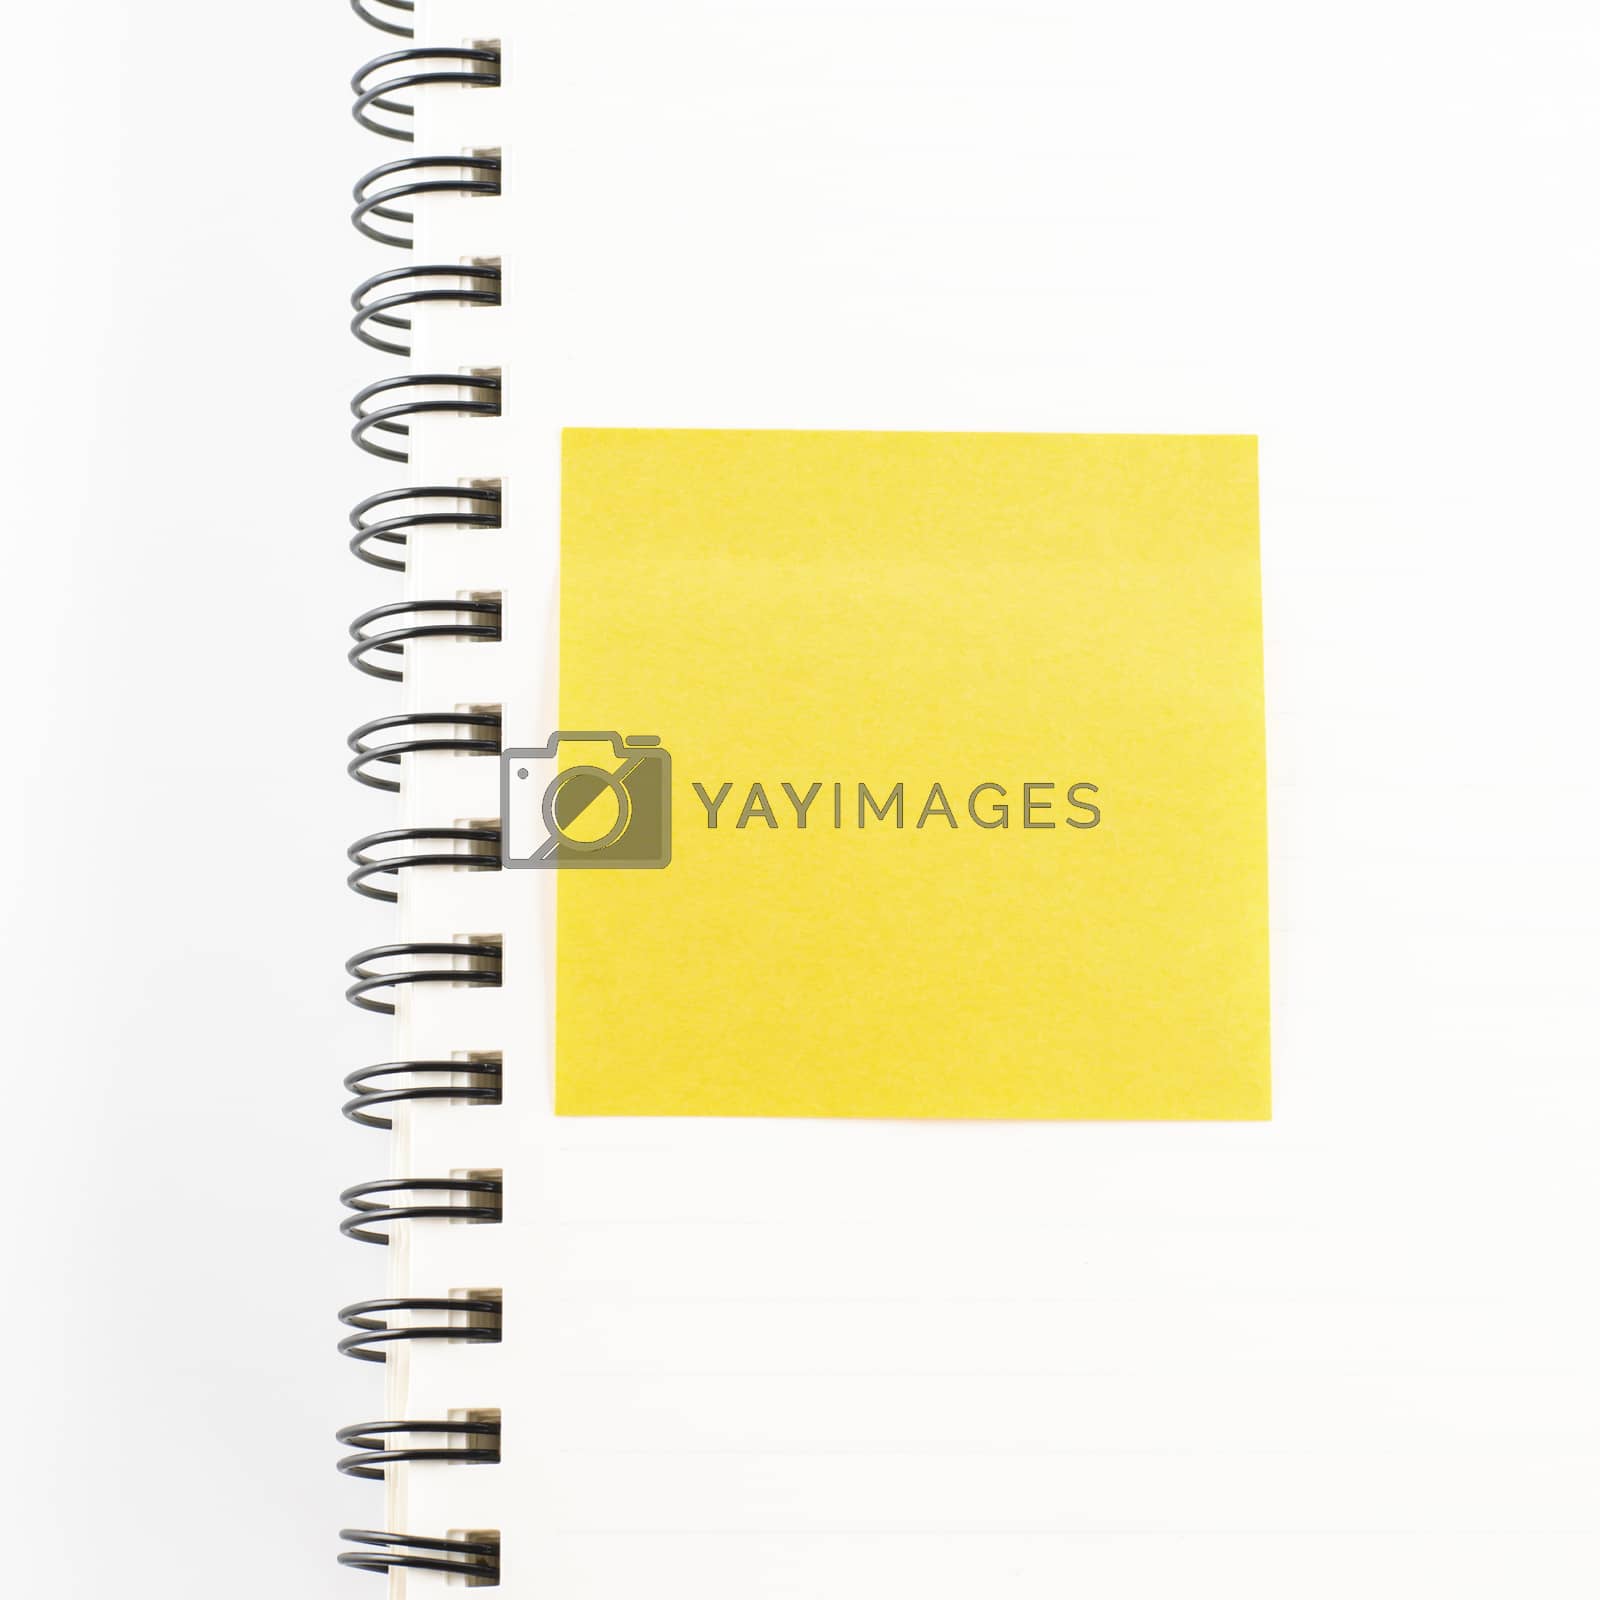 Royalty free image of sticker note on notebook by ammza12